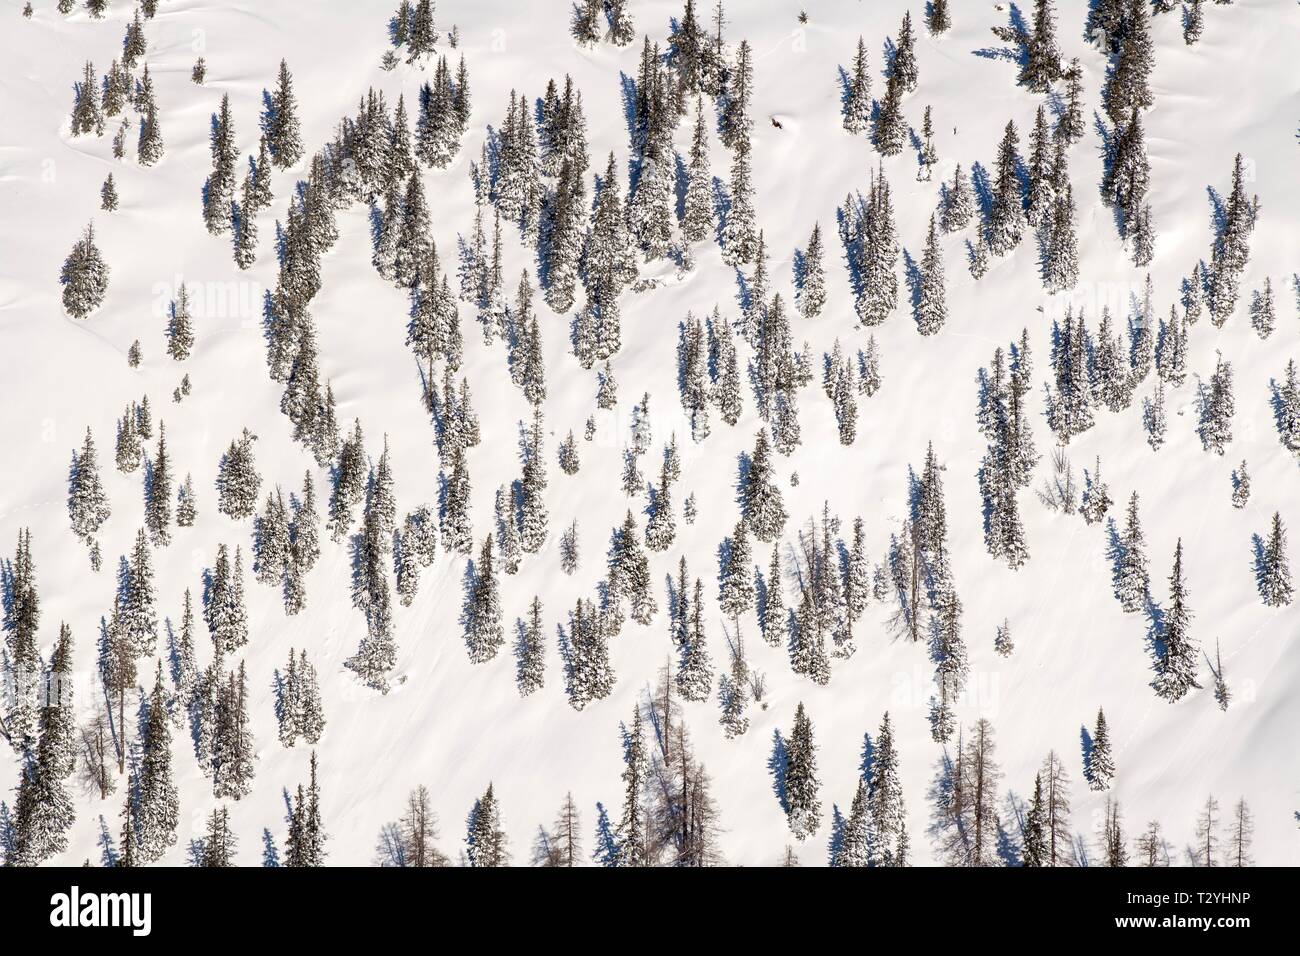 Spruce (Picea abies), high forest or protective forest on a slope with snow, Austria Stock Photo